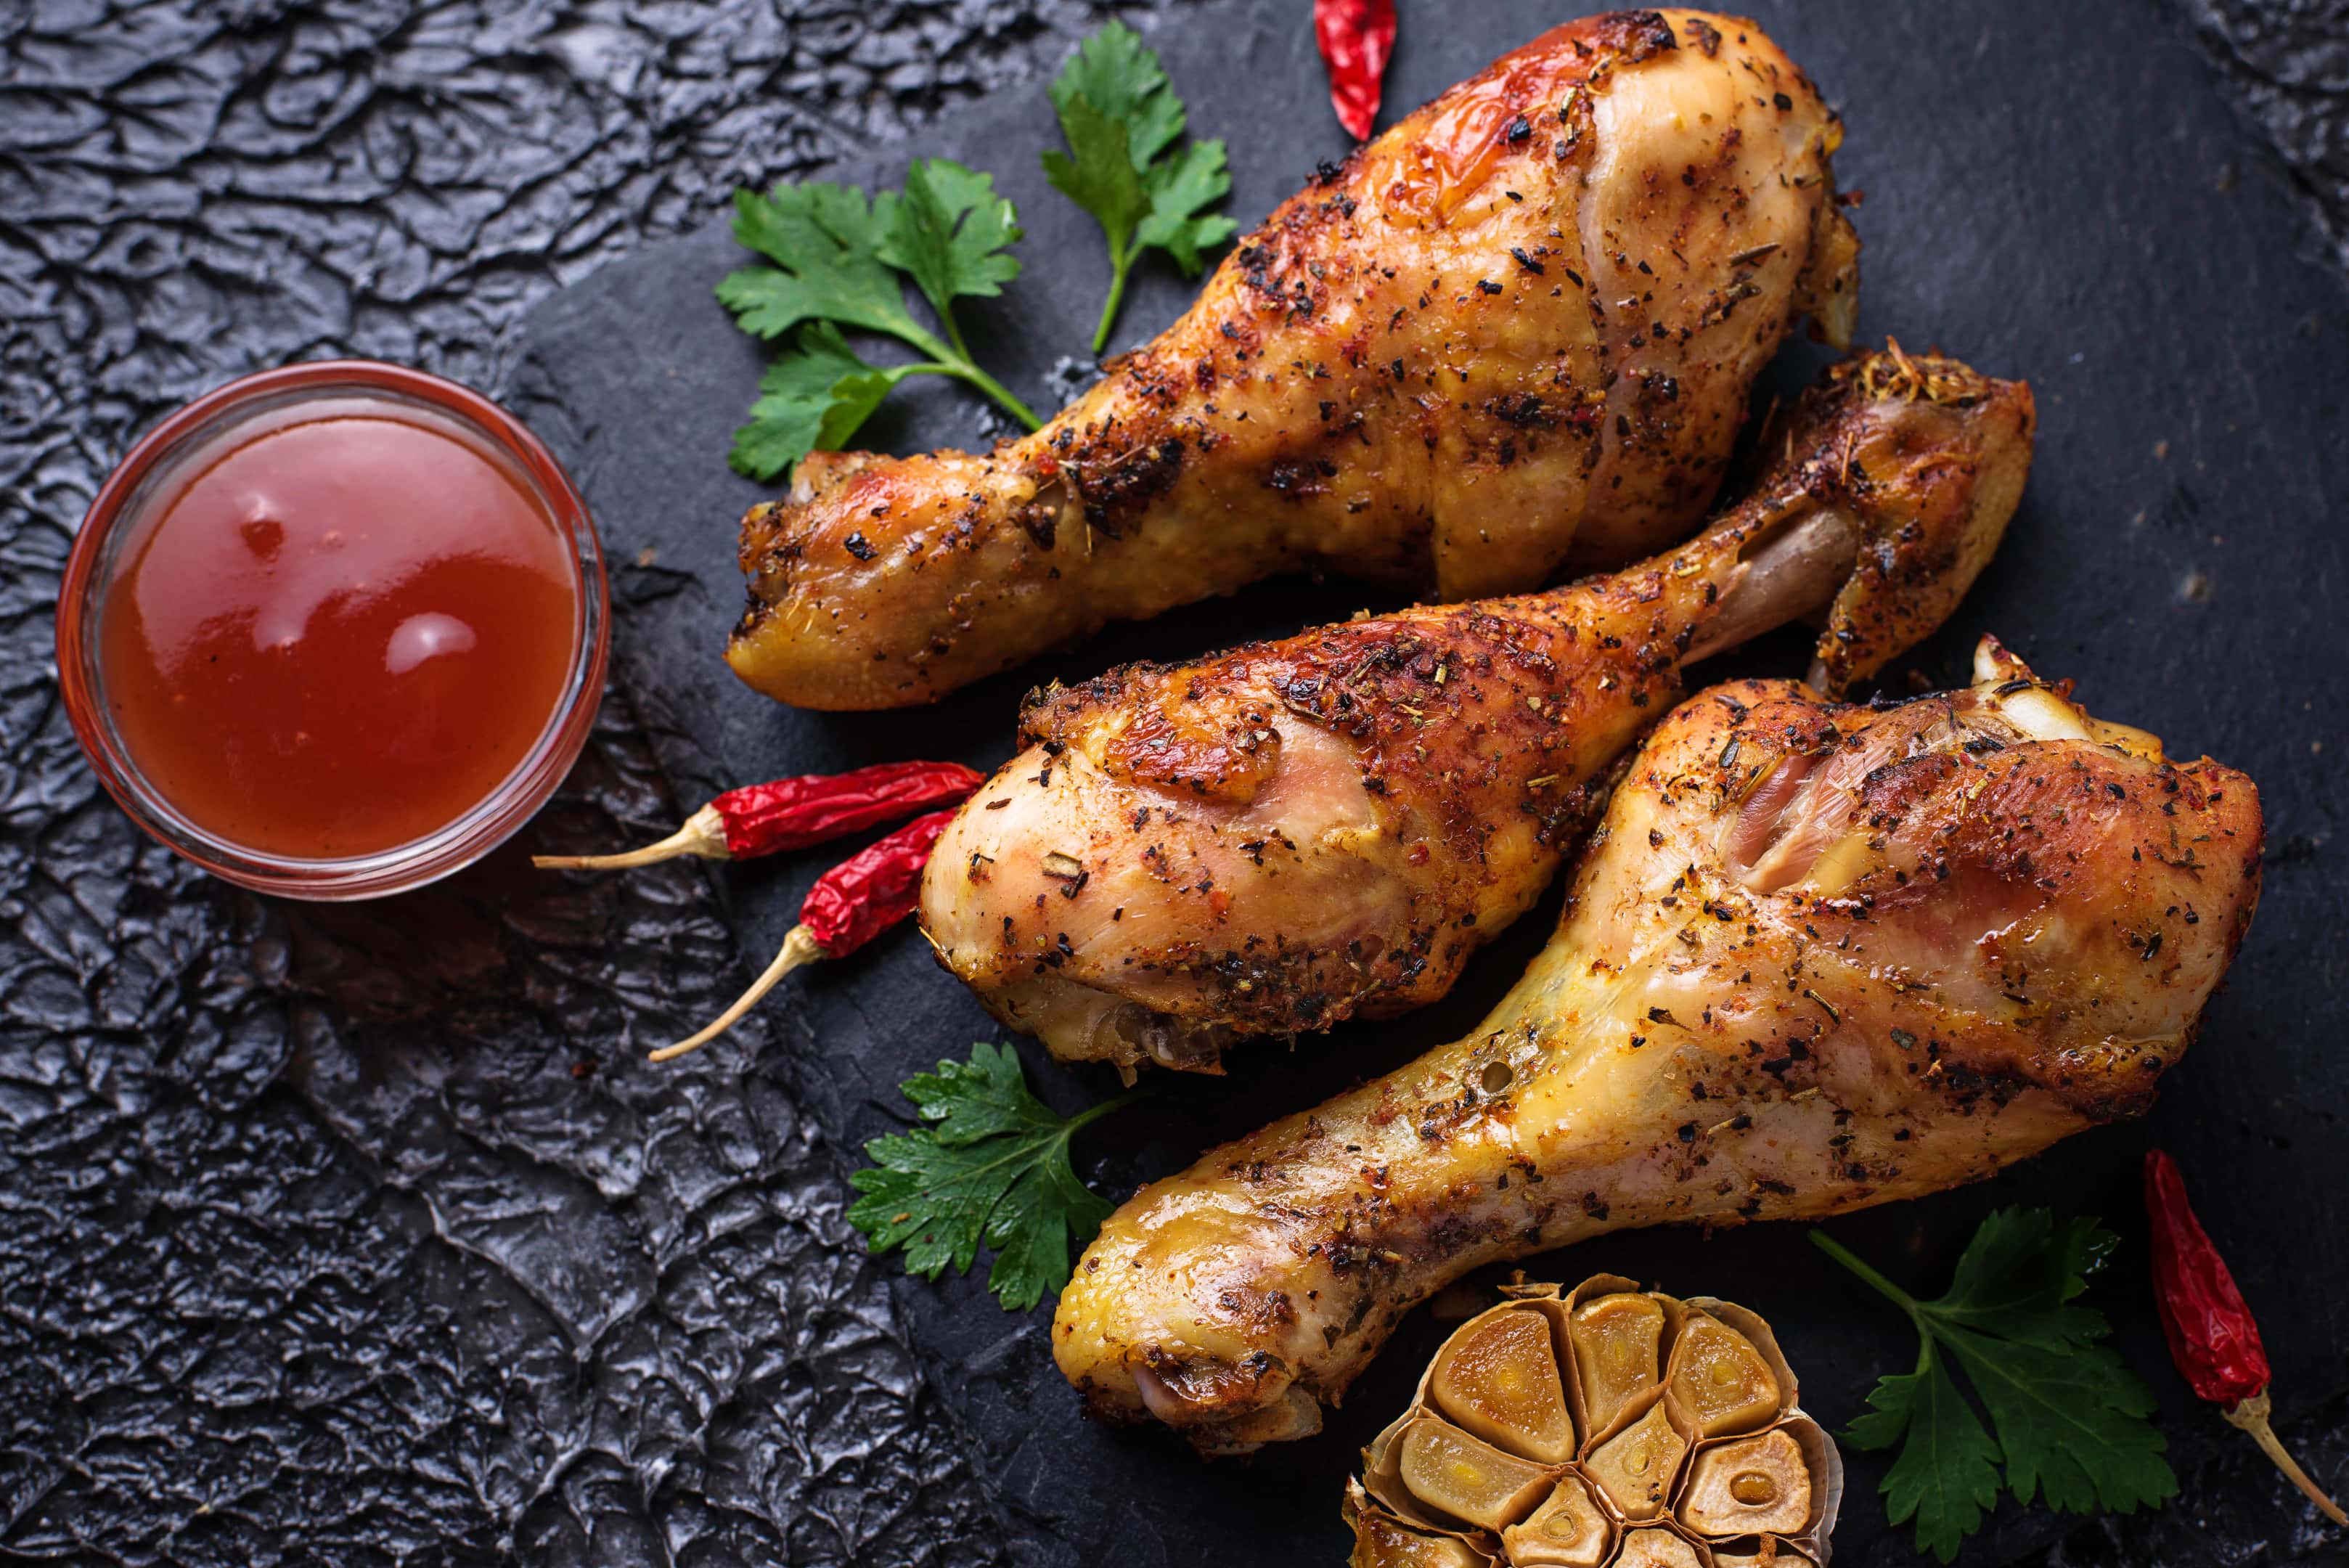 Grilled chicken legs with spices and garlic